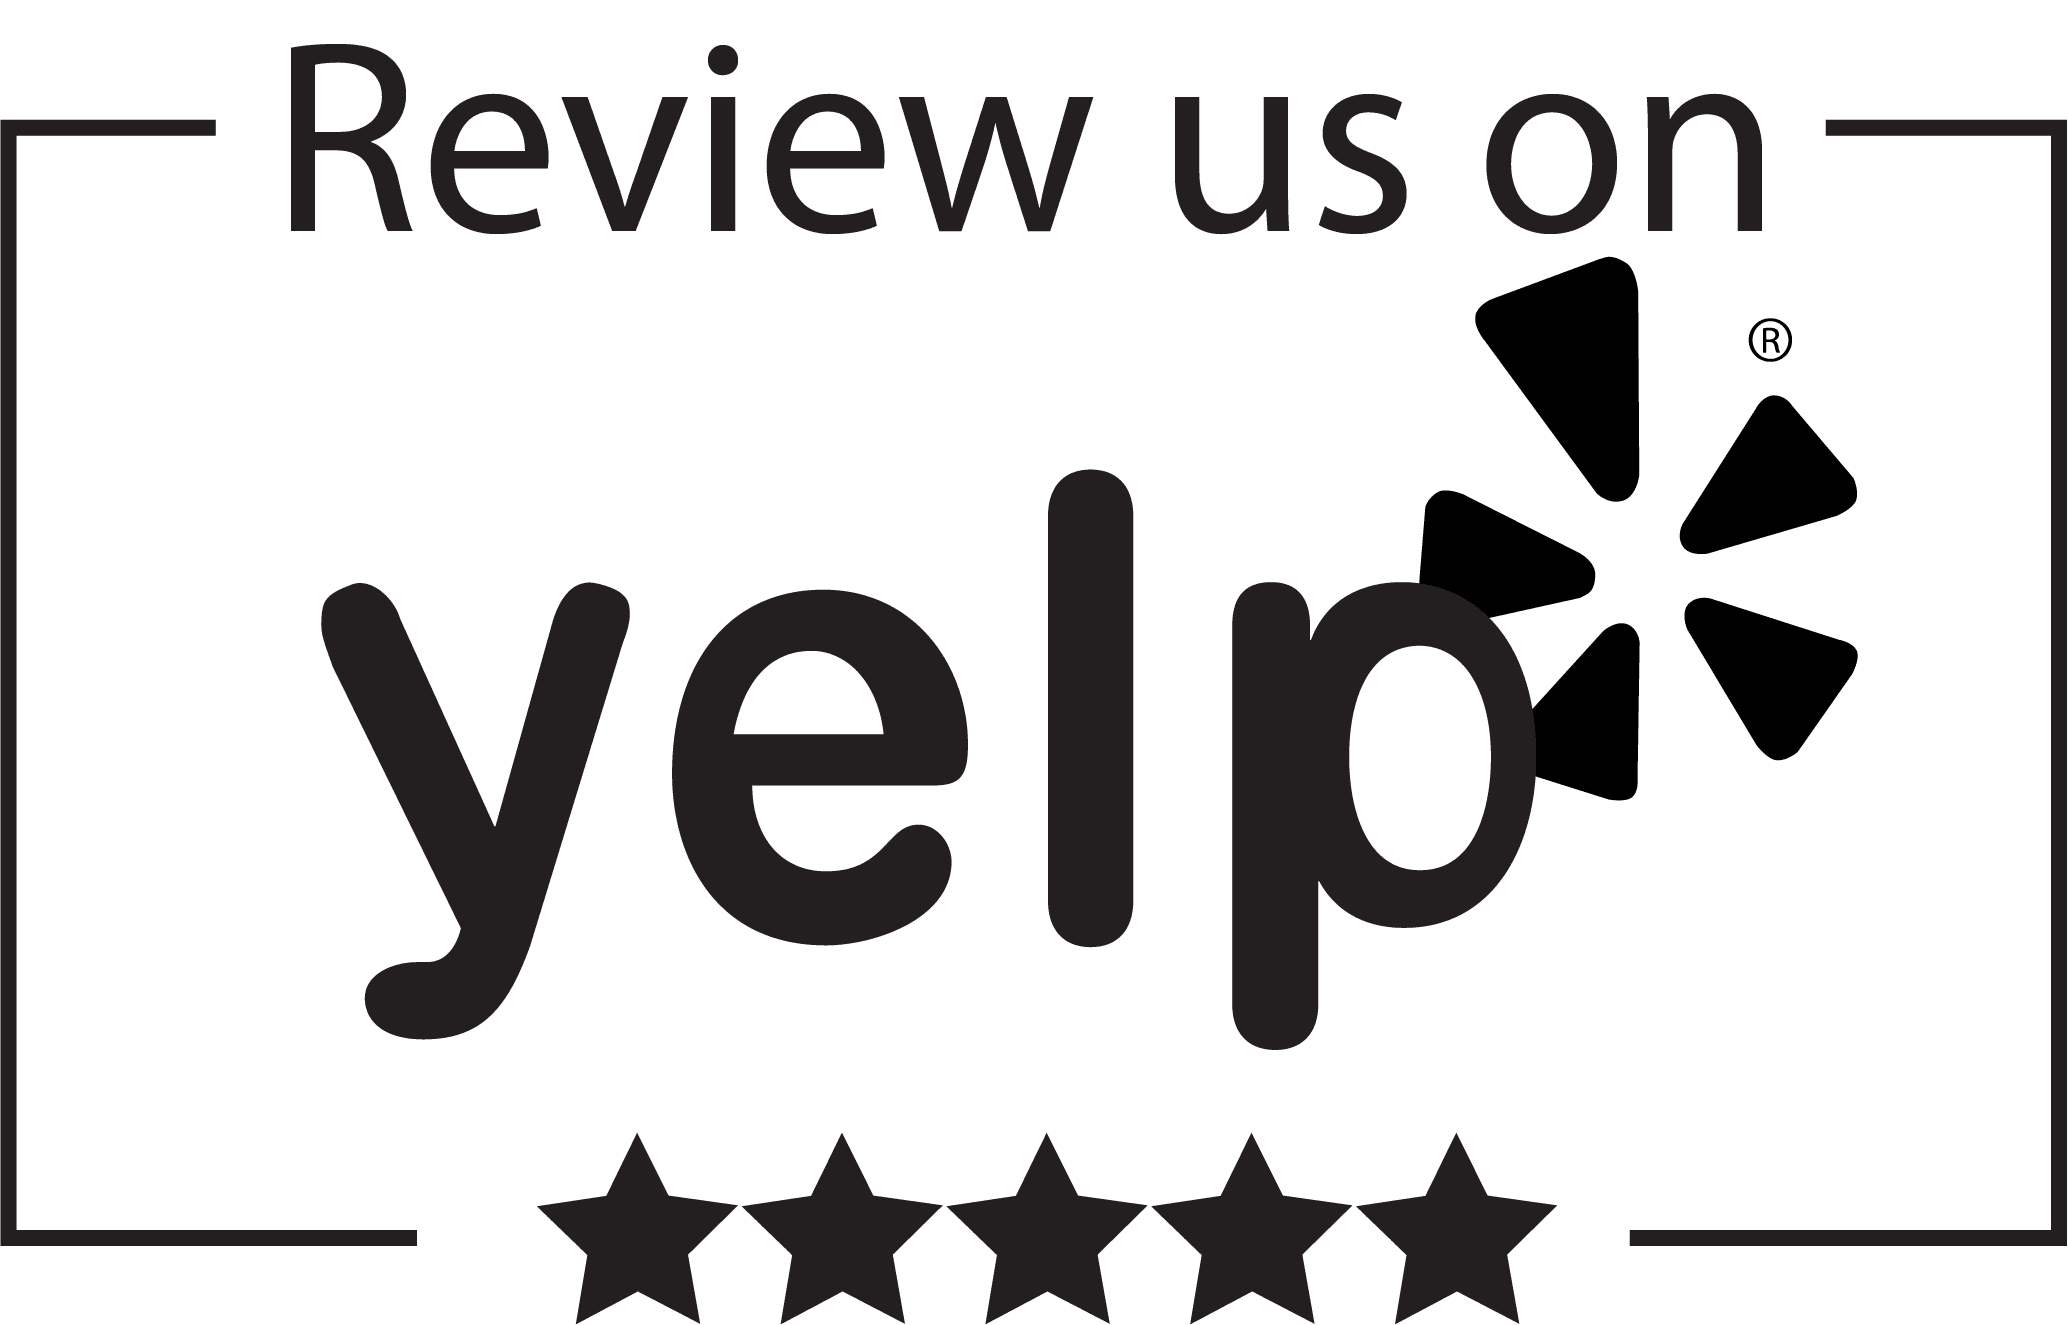 leave michigan crawlspace remediation a yelp review